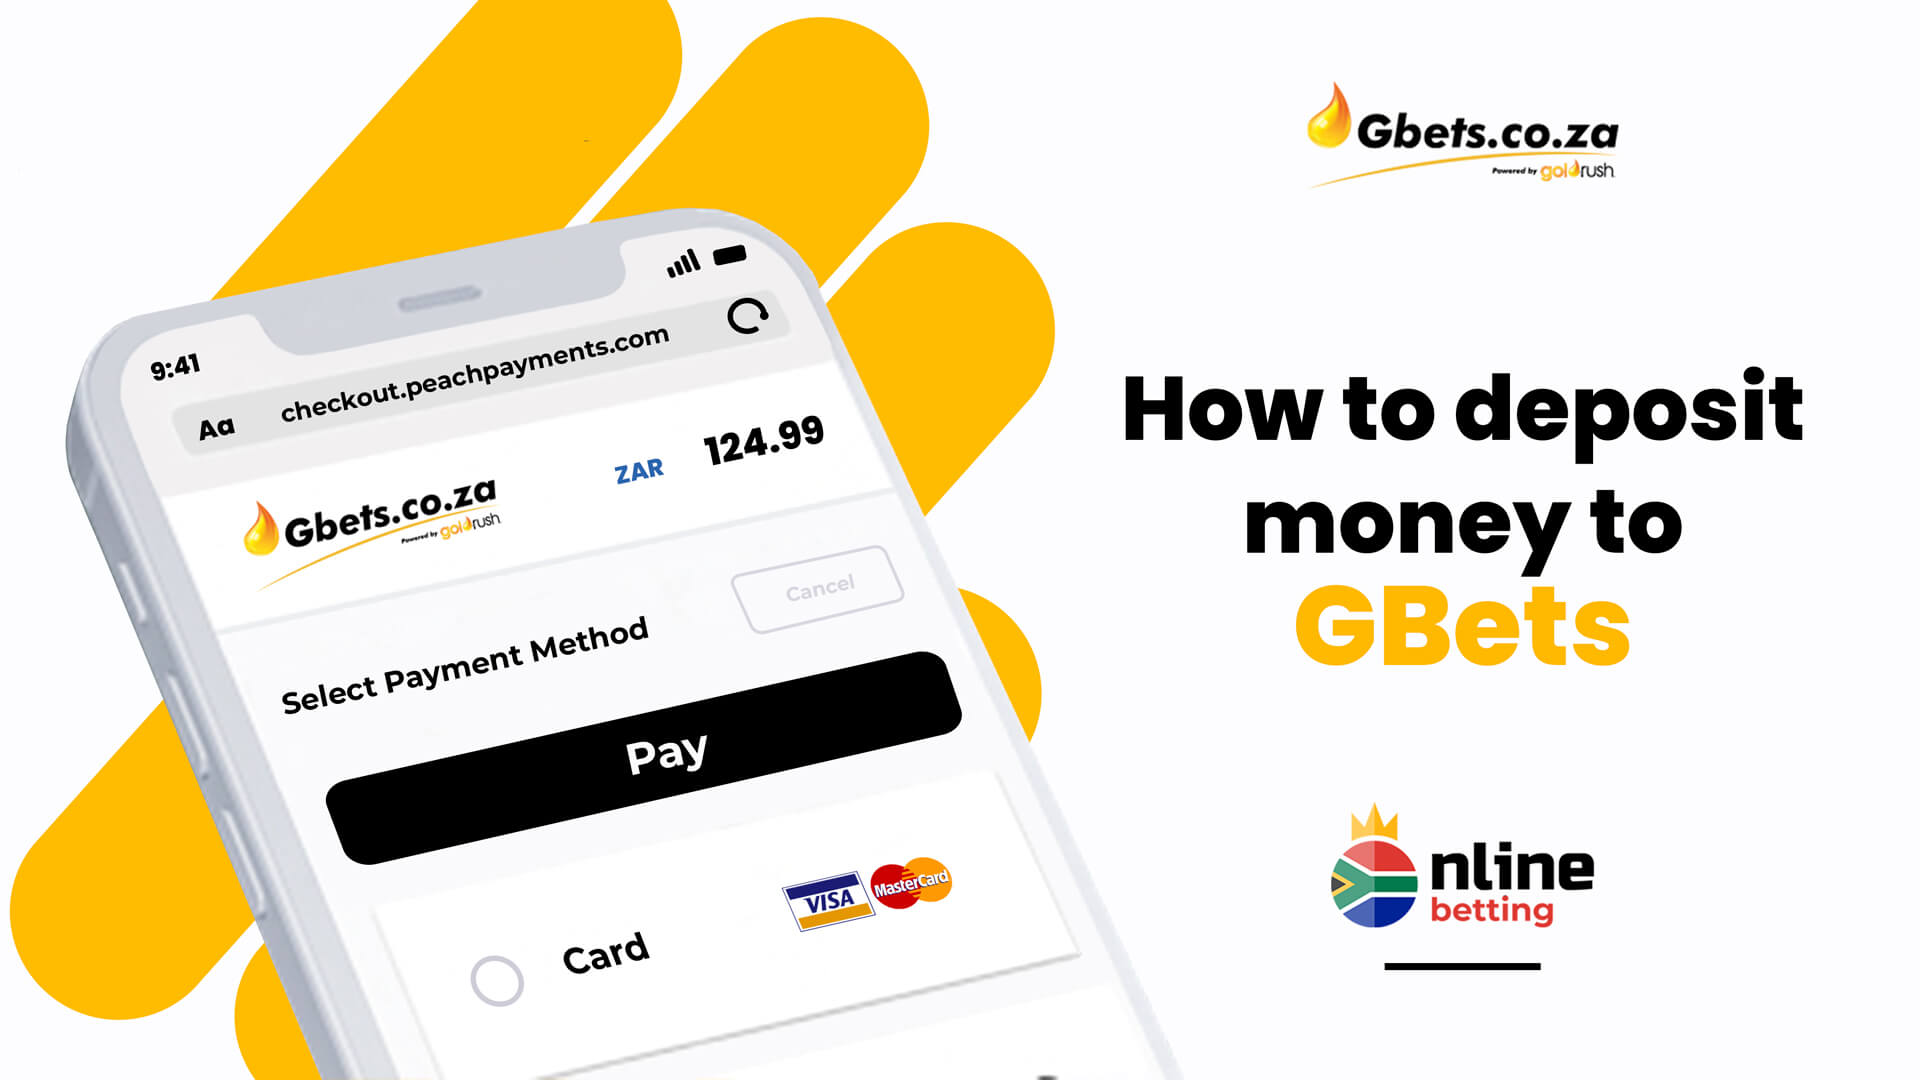 How to deposit at Gbets